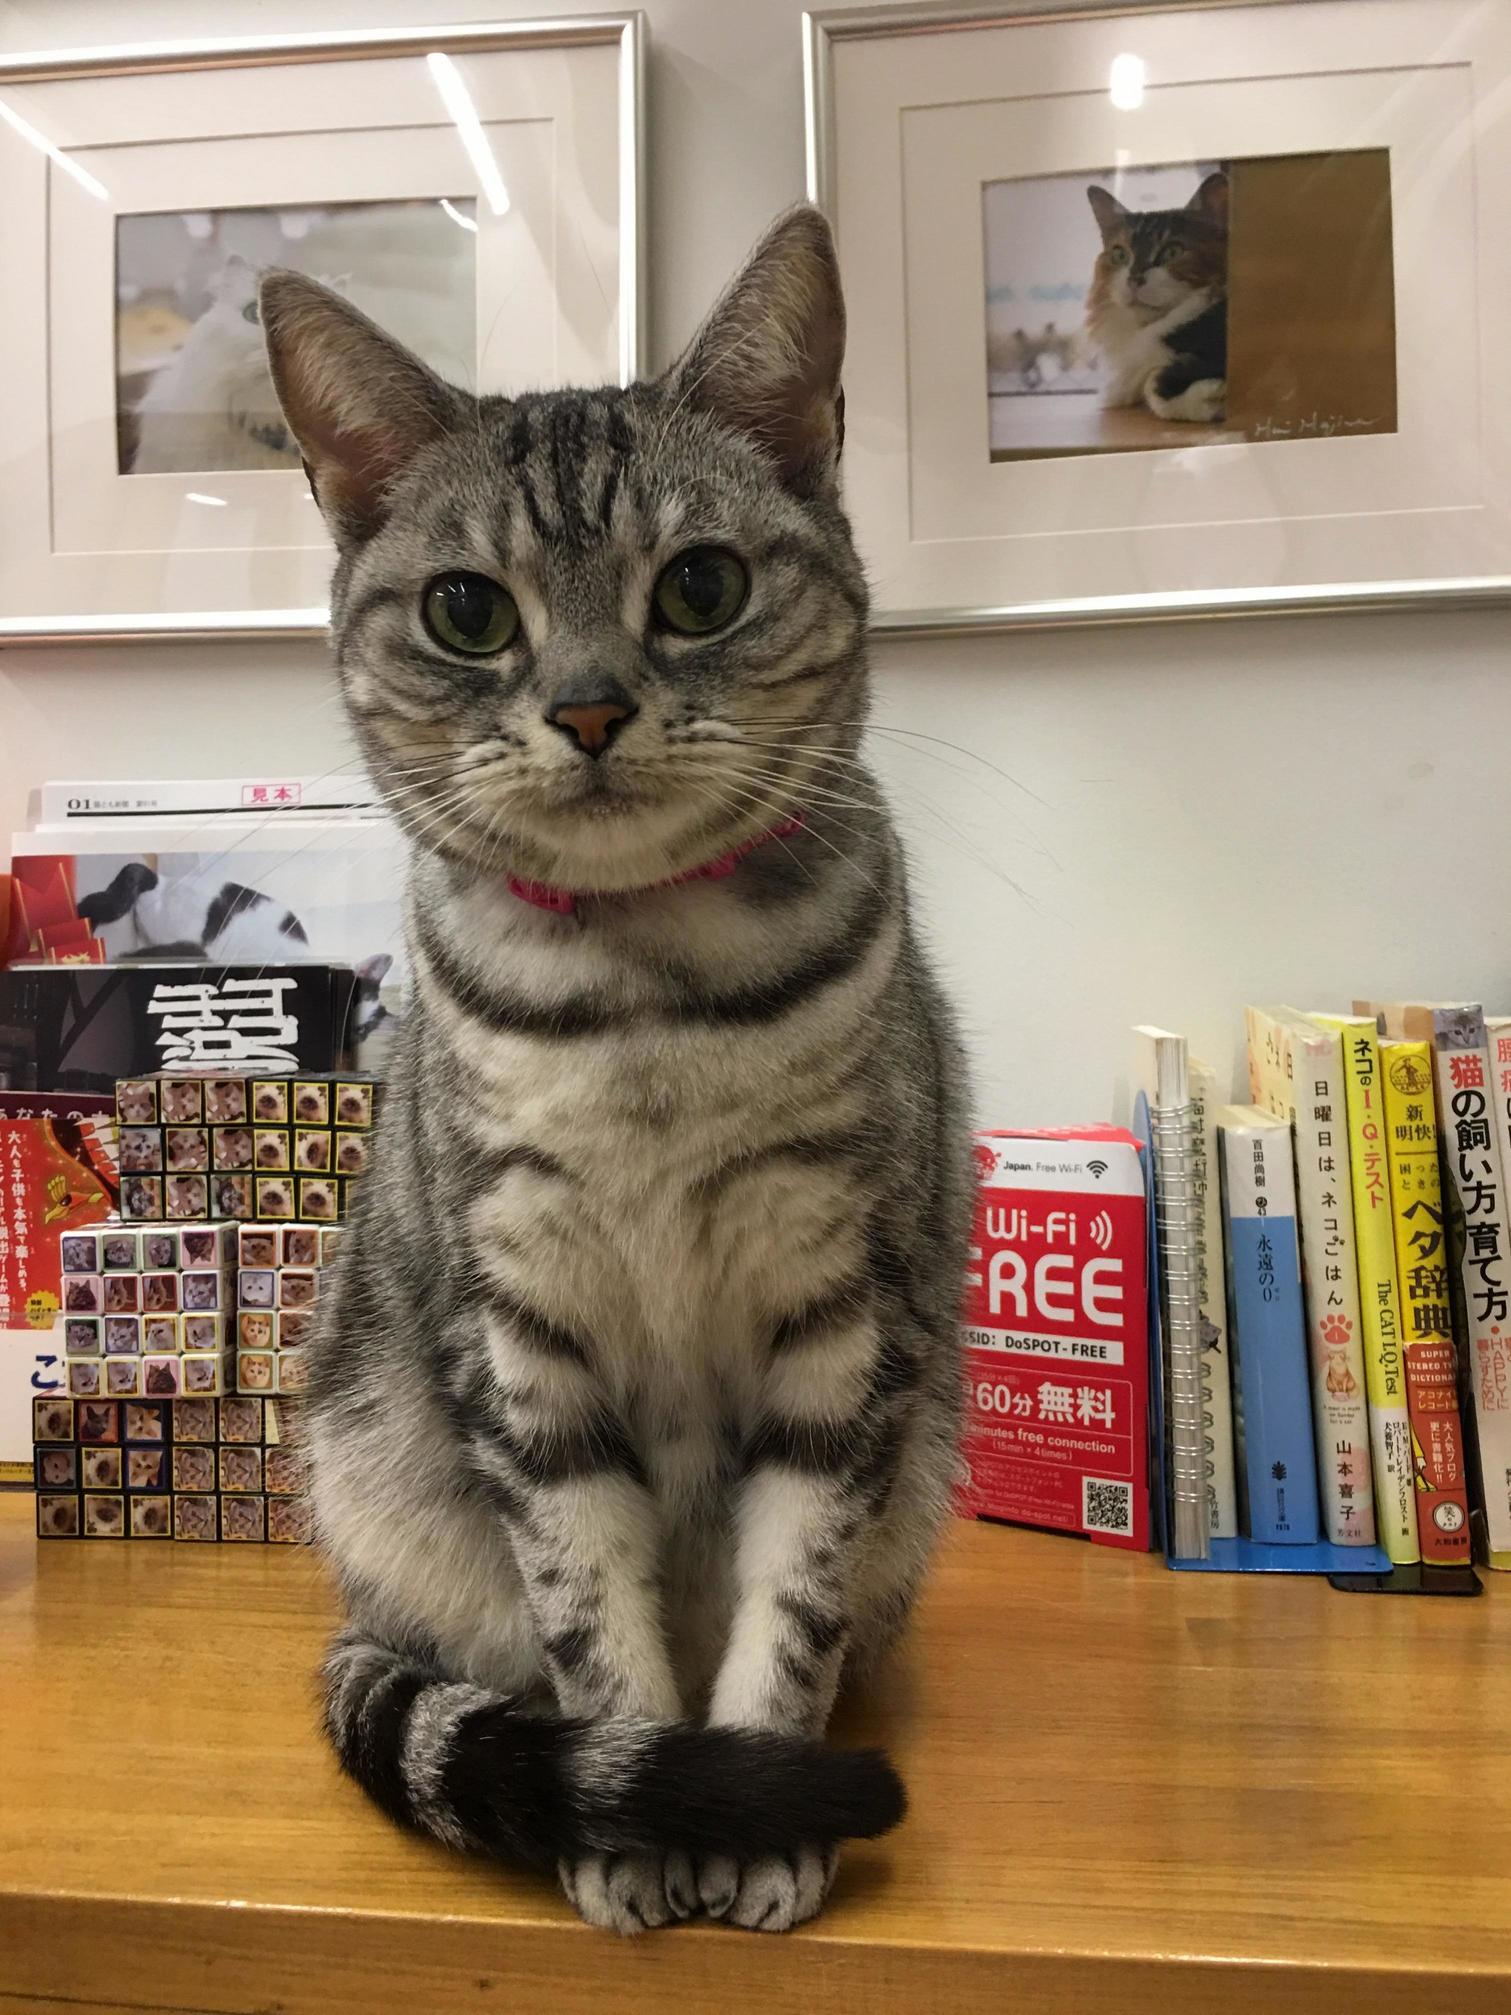 A very photogenic cat from a cat cafe in japan